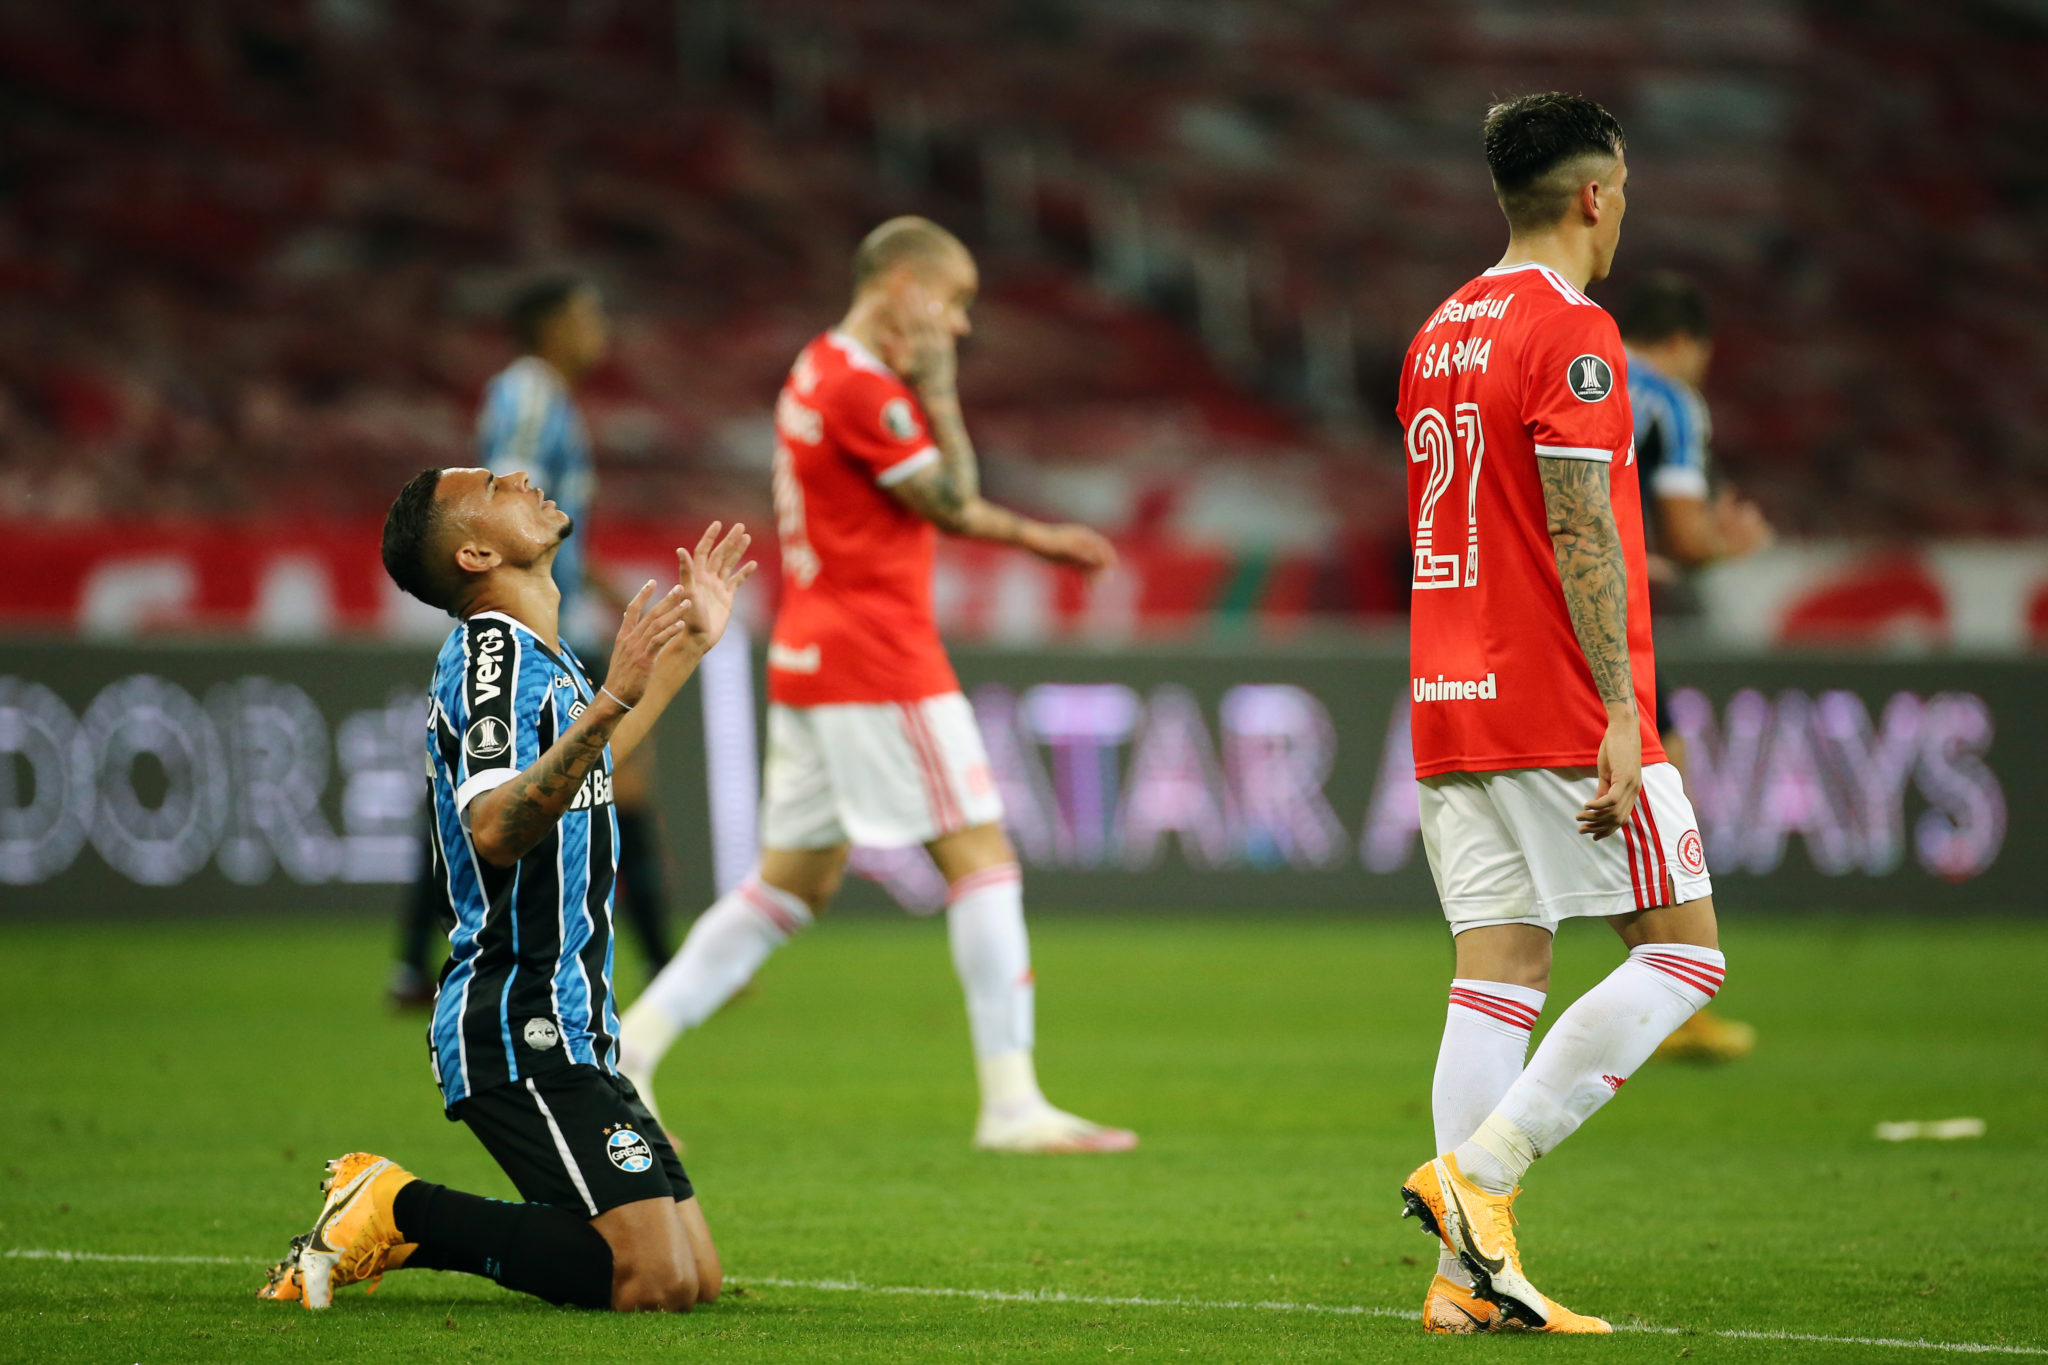 PORTO ALEGRE, BRAZIL - SEPTEMBER 23: Luiz Fernando of Gremio prays as he celebrates winning a group E match of Copa CONMEBOL Libertadores 2020 between Internacional and Gremio at Beira-Rio Stadium on September 23, 2020 in Porto Alegre, Brazil. All games of the tournament are played behind closed doors to avoid spread of COVID-19.  (Photo by Diego Vara-Pool/Getty Images)